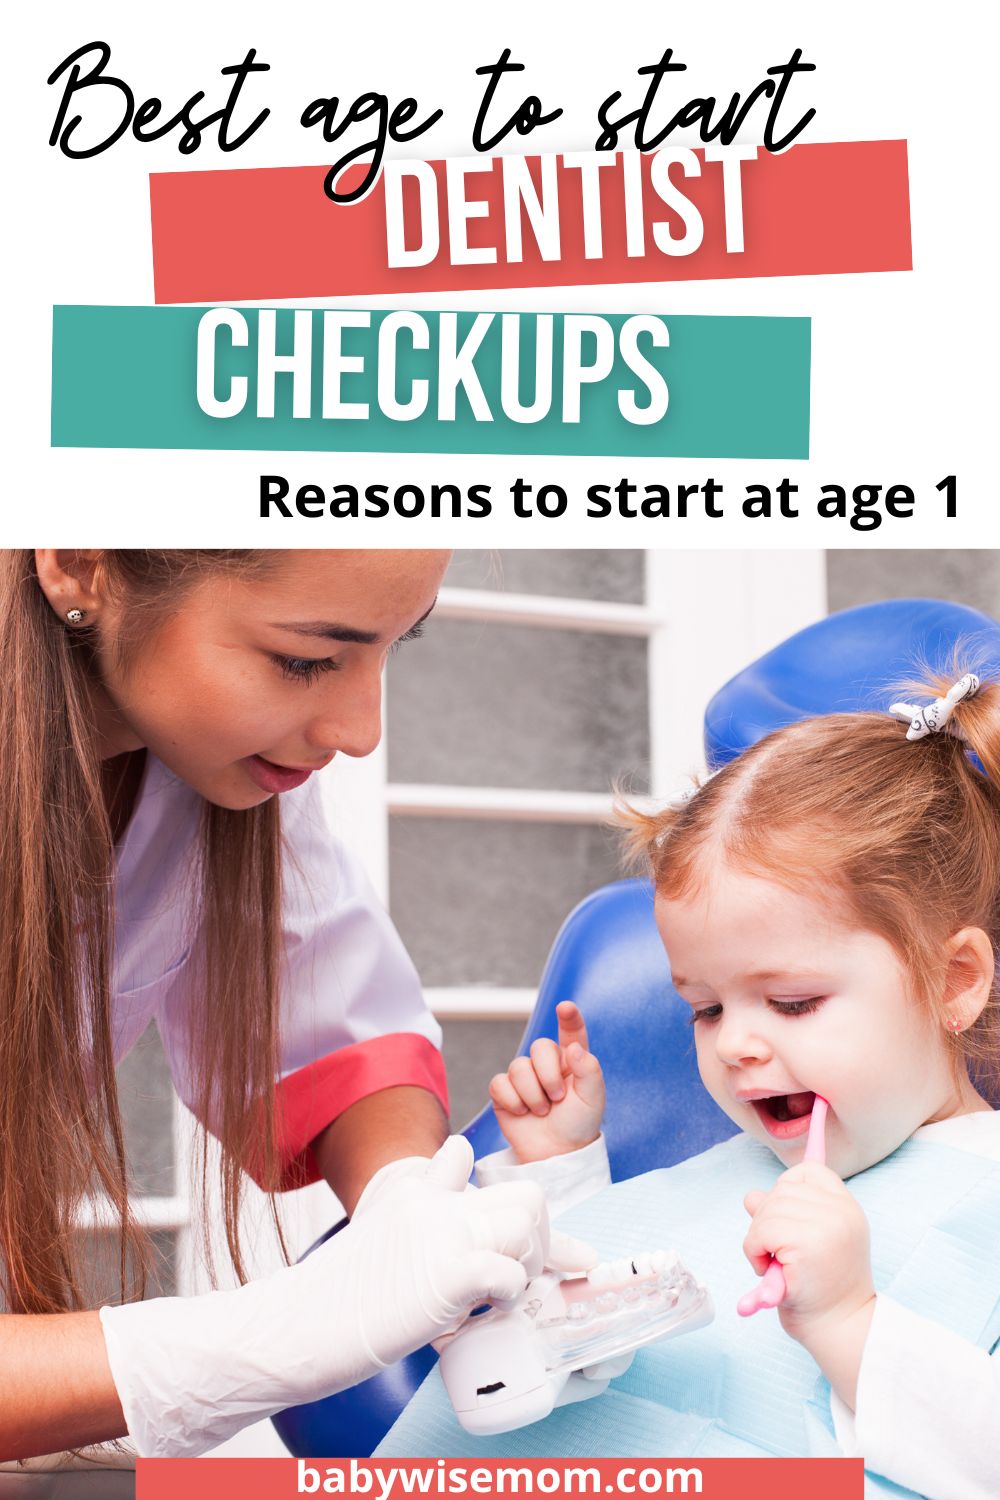 Best age for dentist checkups pinnable image